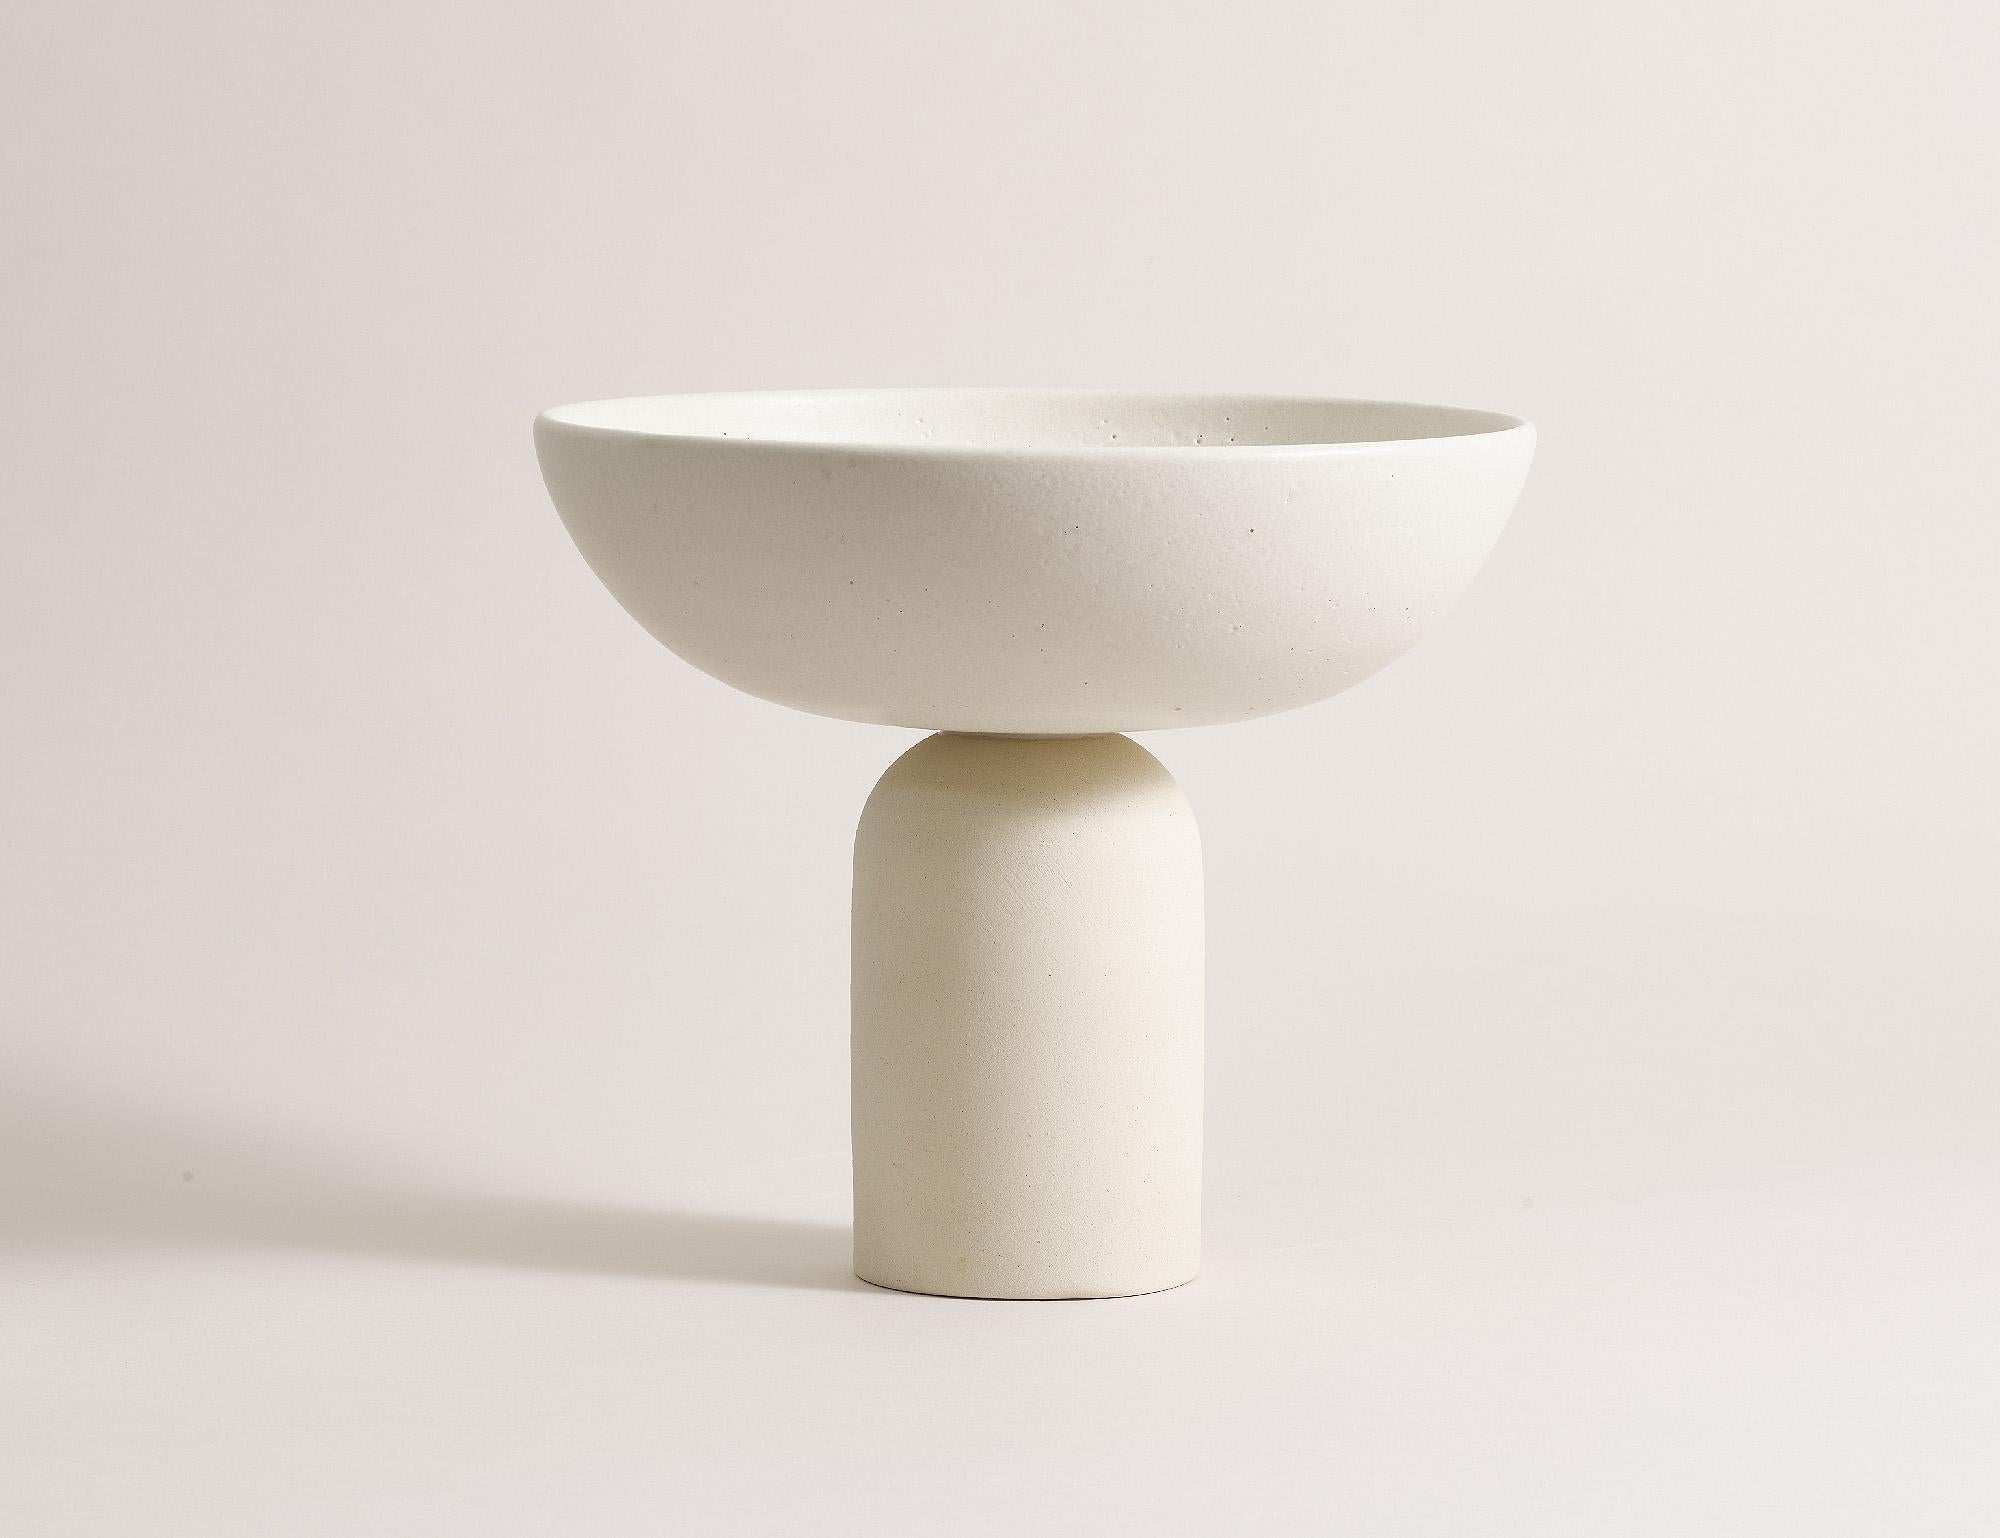 Handcrafted large 015 coupe by Lovebuch
Dimensions: Ø 22 x H 20 cm
Materials: Sandstone, handcrafted piece

Katia works with wood and clay, these raw, powerfully expressive materials are shaped to create a poetry of objects that inhabit our